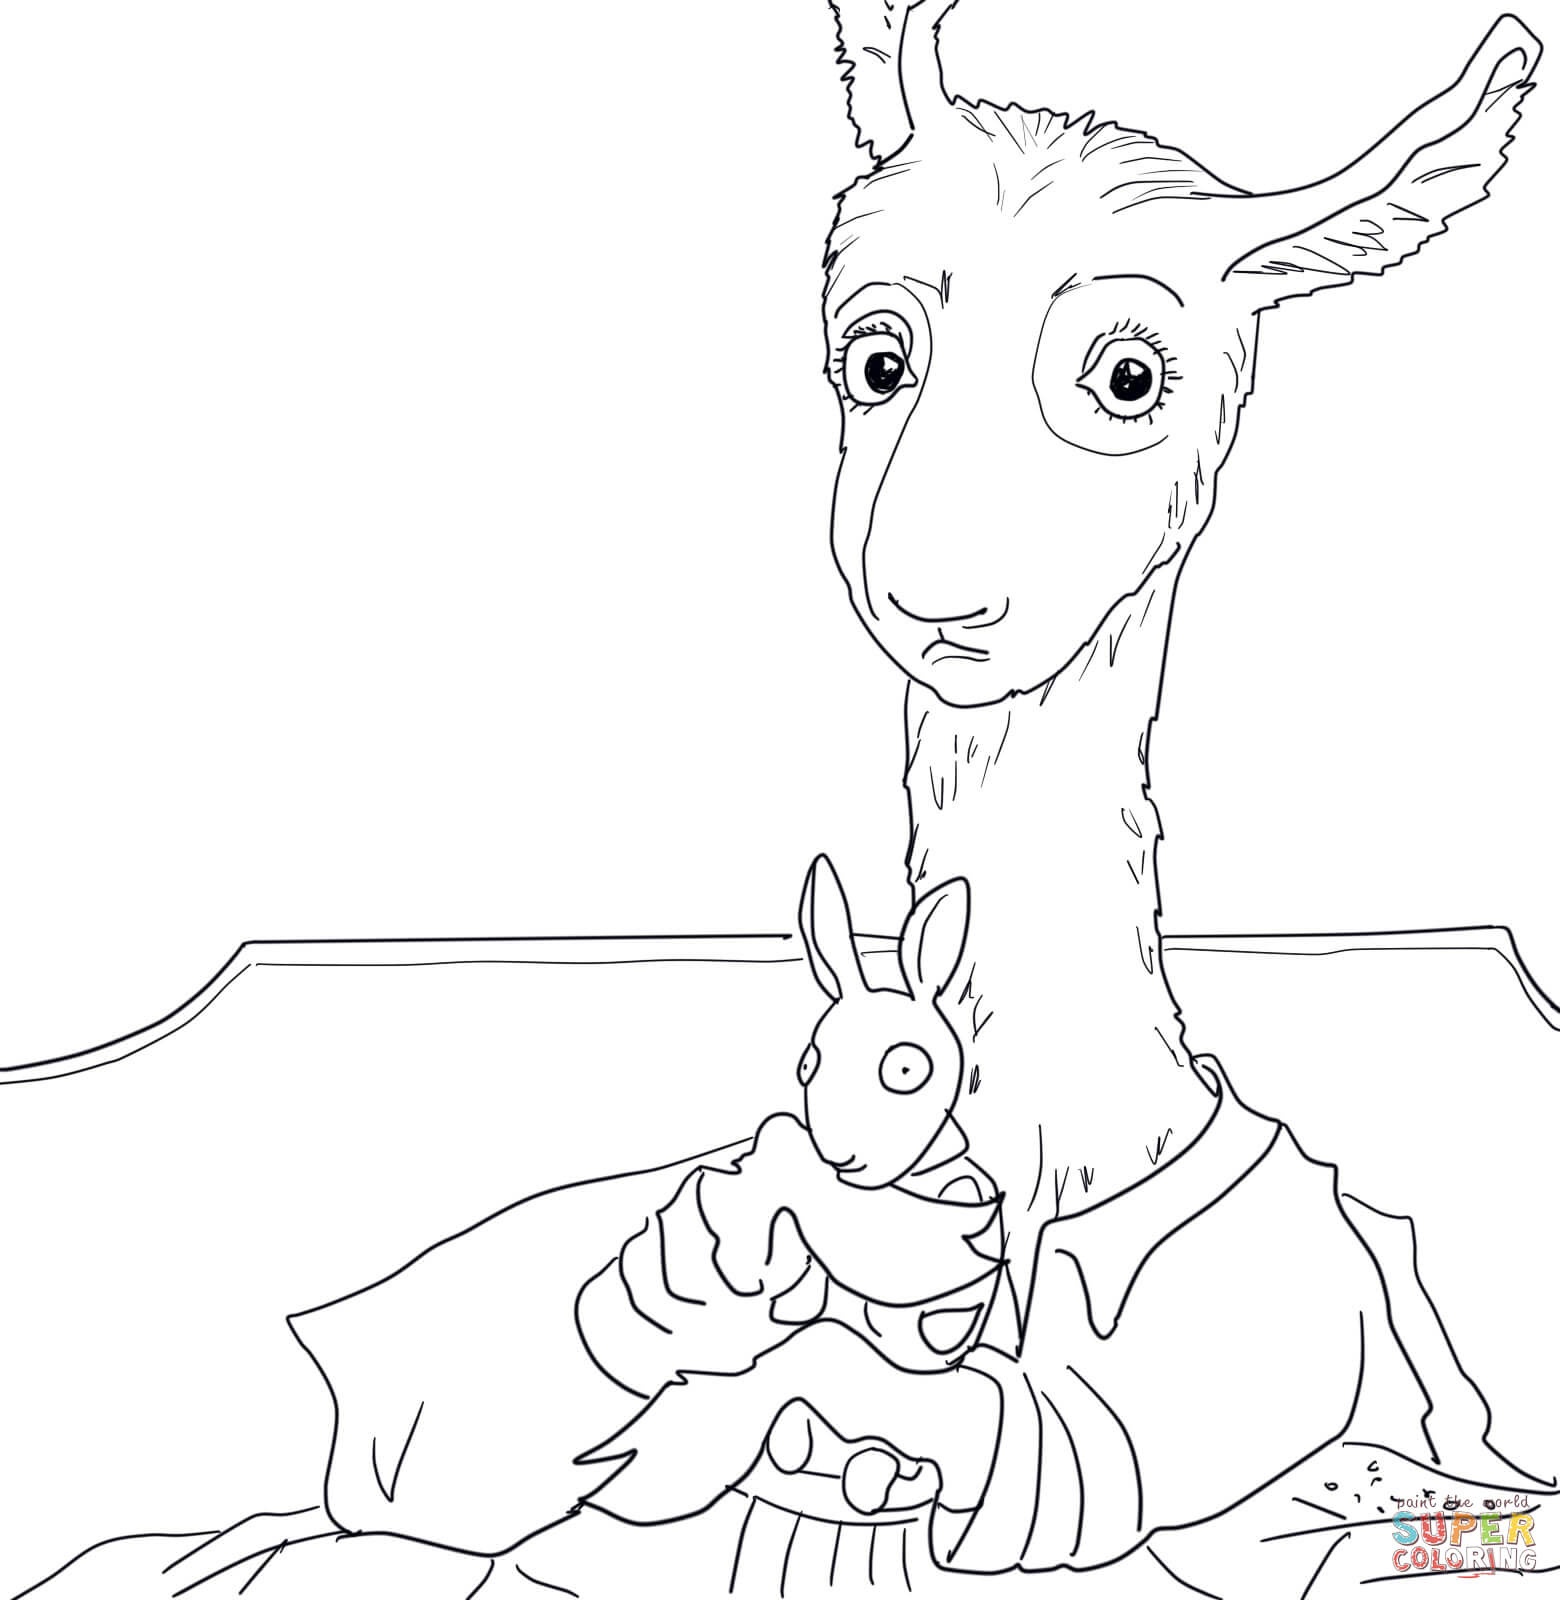 Coloring Pages Kids In Pajamas - Coloring Home - Free Printable Pajama Coloring Pages